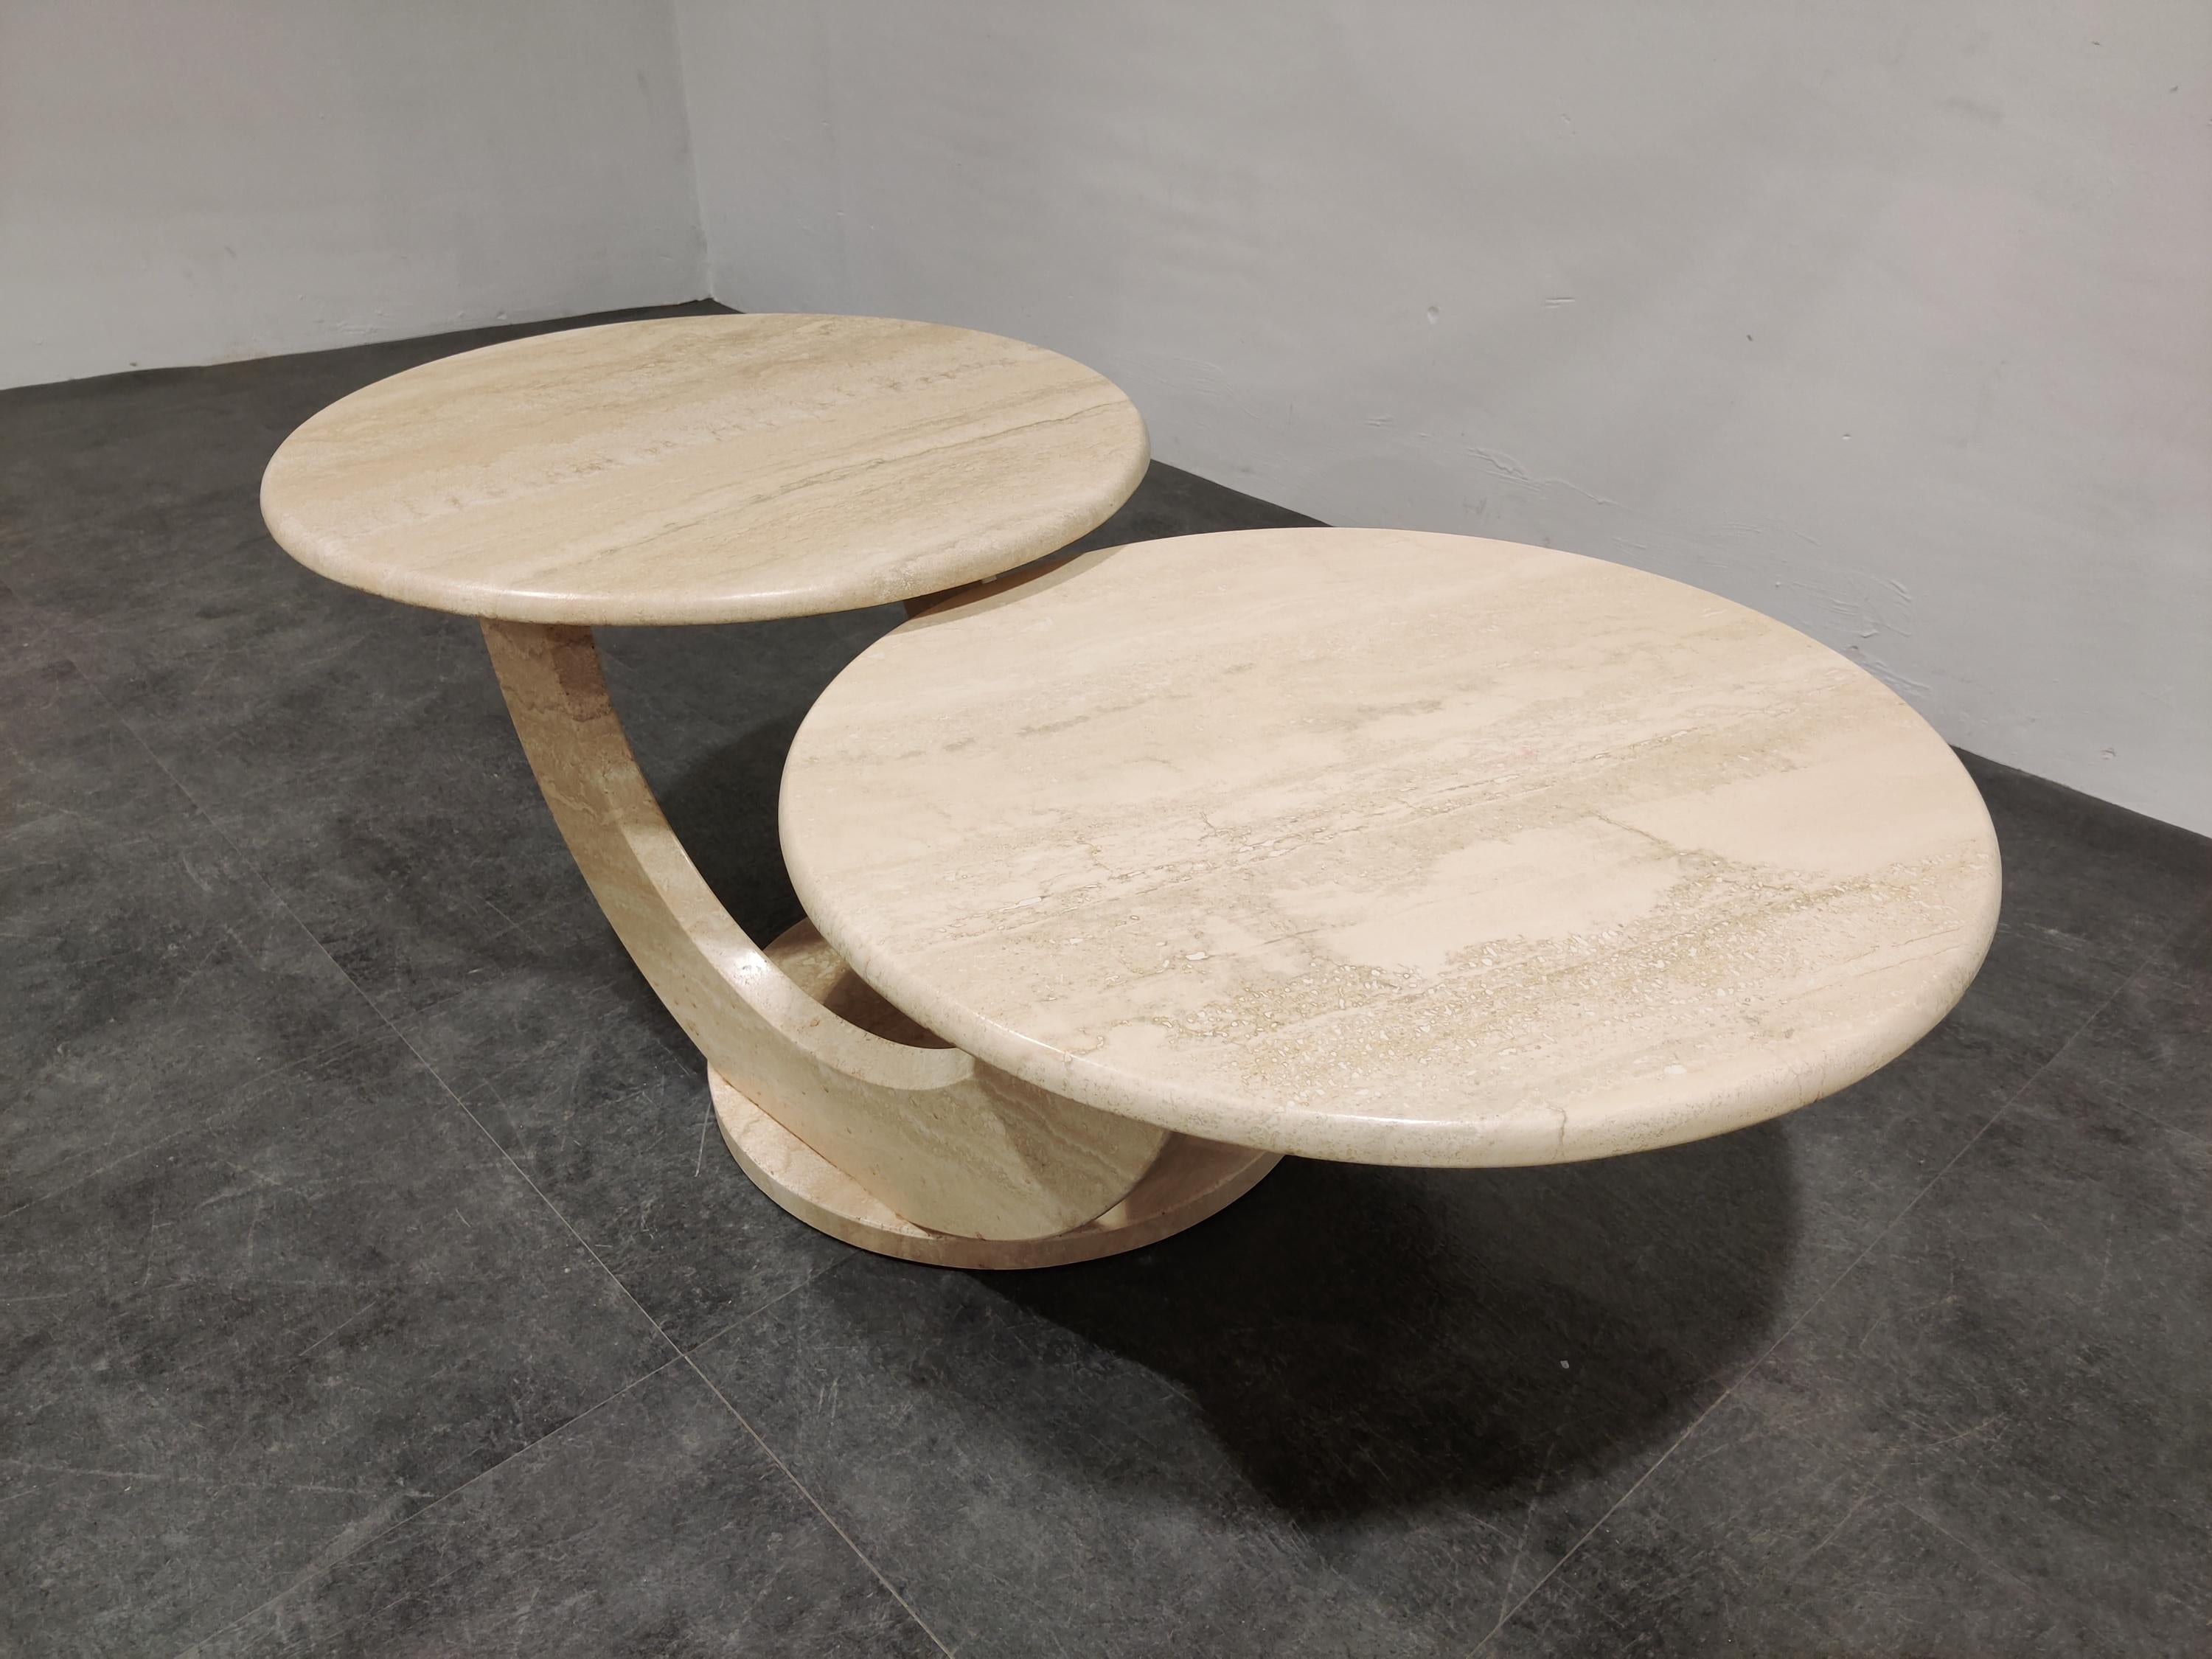 Timeless travertine coffee tables with two round tops.

Beautiful arched base.

Good condition.

1970s - Italy

Dimensions:
Height: 42cm/16.53